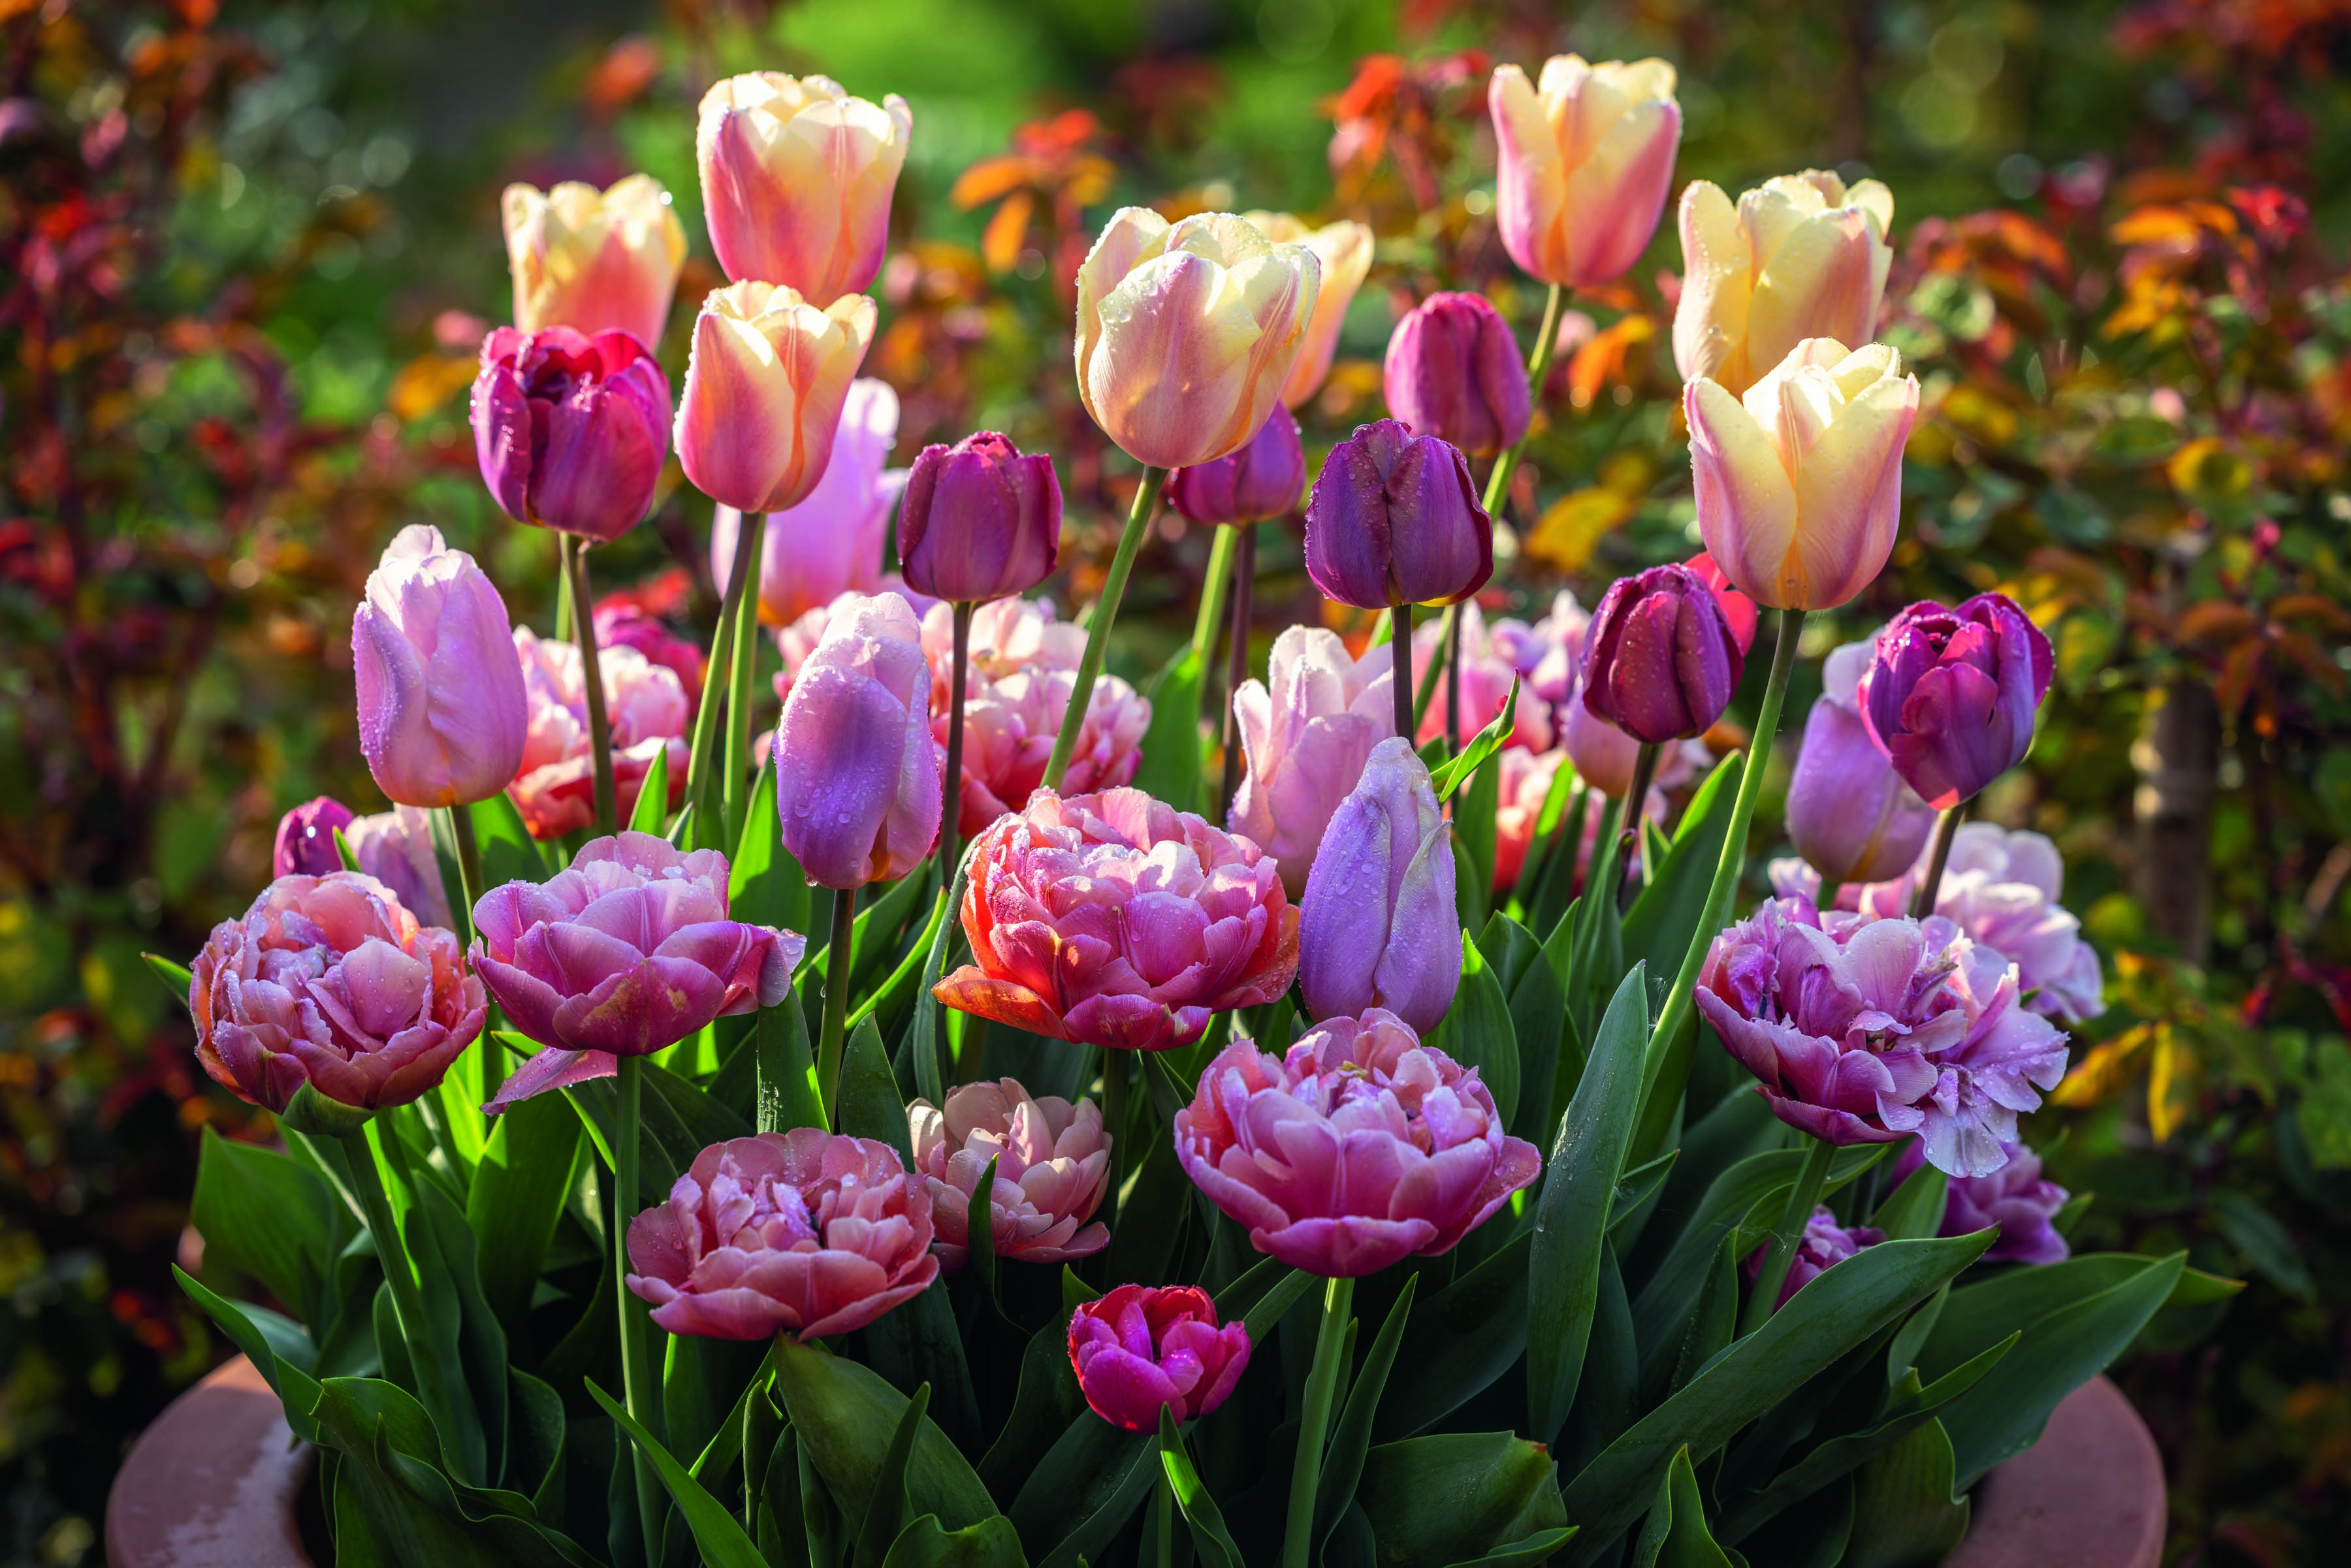 Coral Sand Tulip collection (Jonathan Buckley/PA)